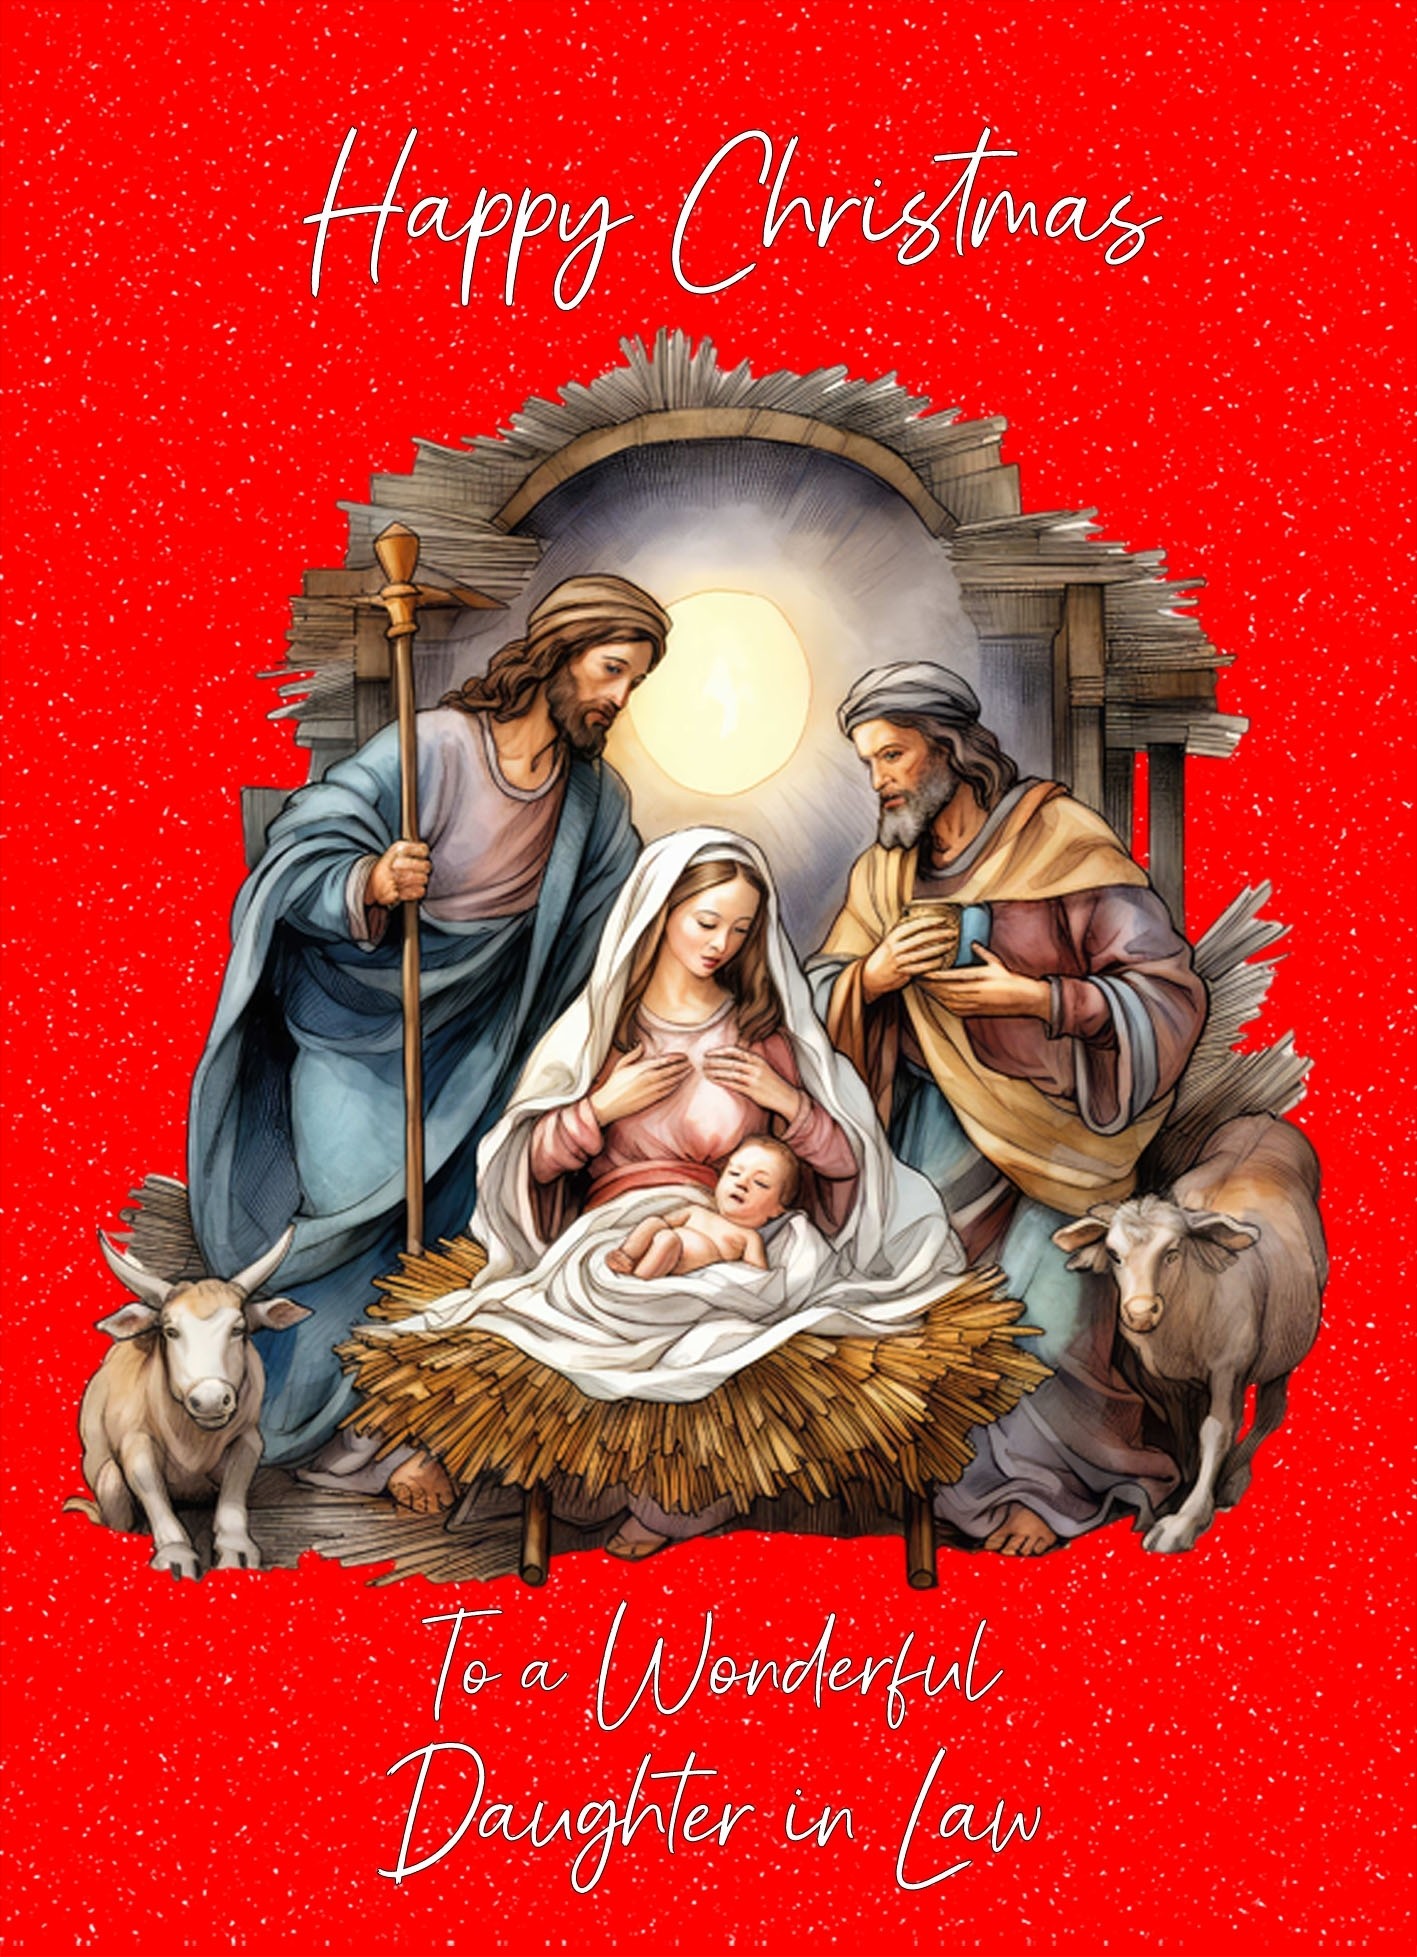 Christmas Card For Daughter in Law (Nativity Scene)